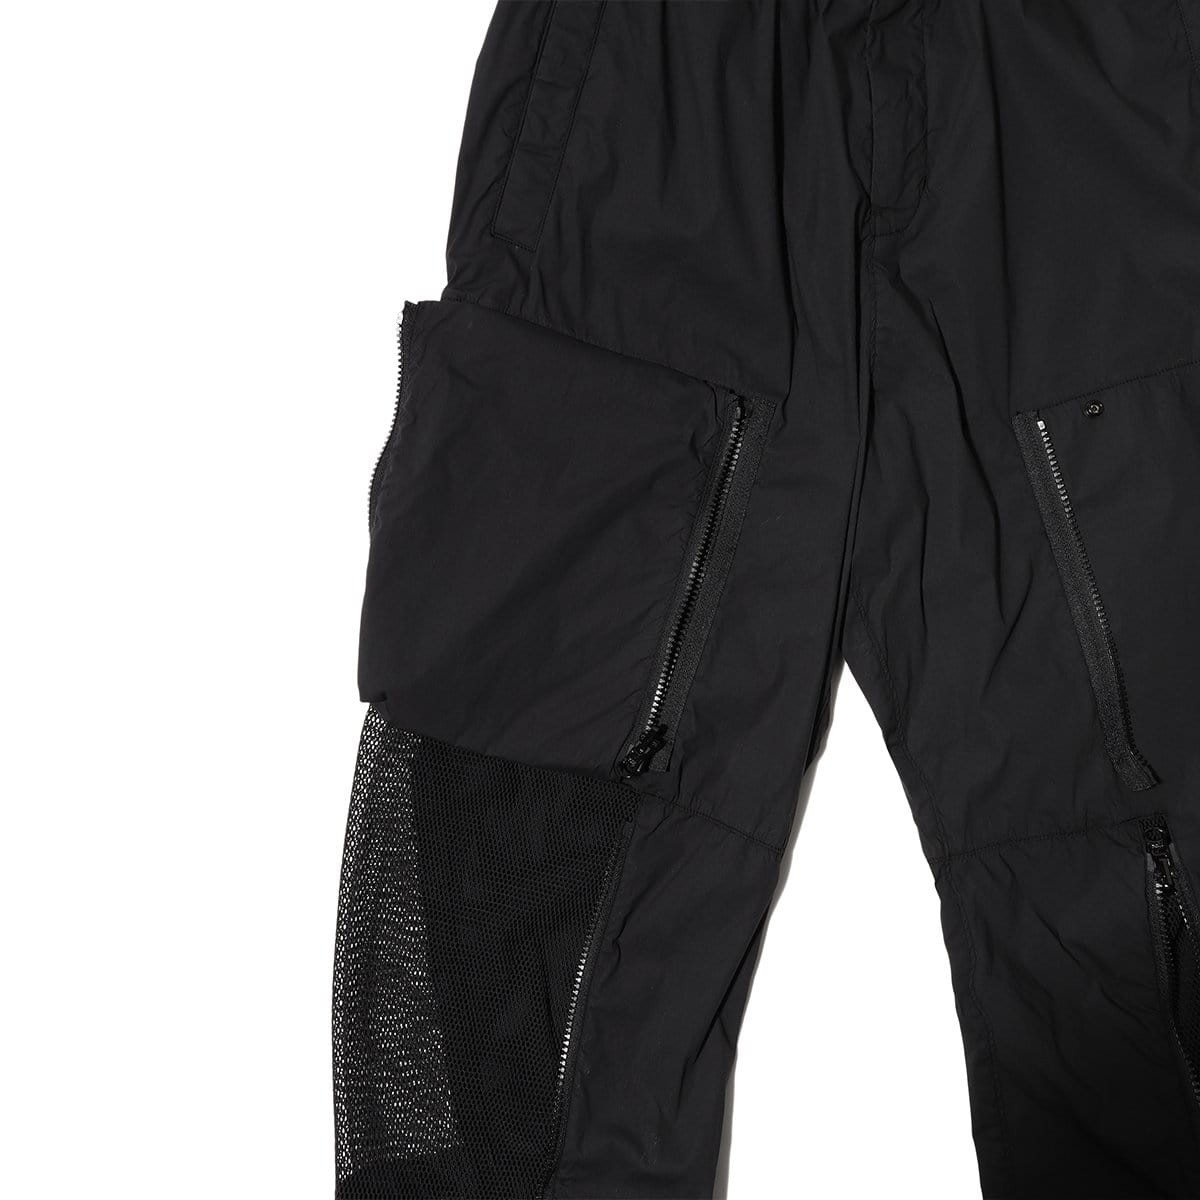 Stone Island Shadow Project Bottoms PANTS 721930206